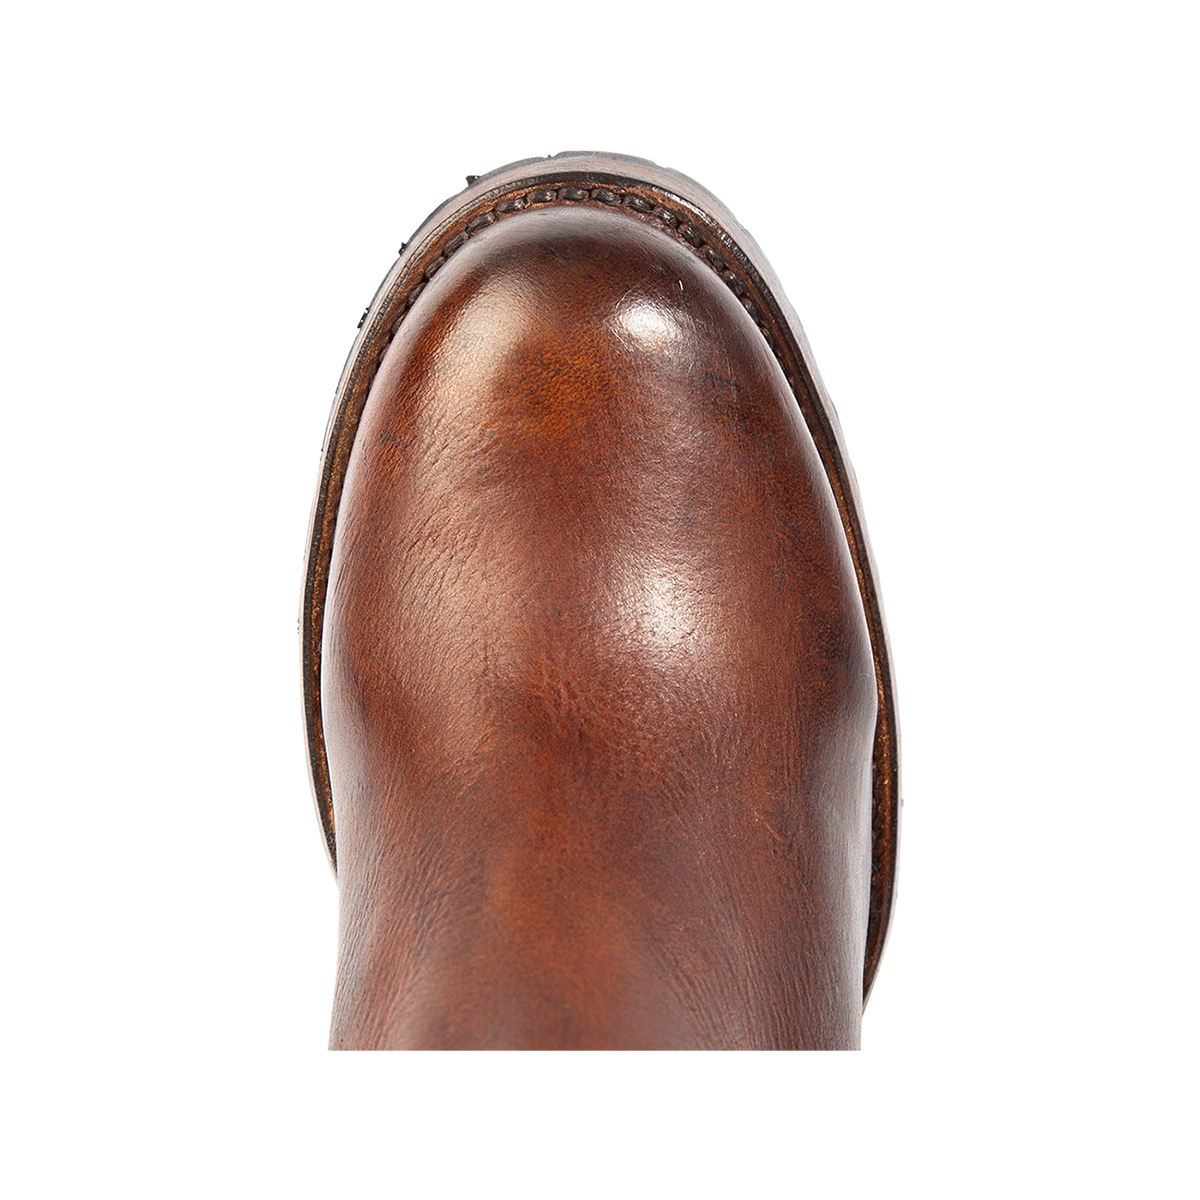 Top view showing a rounded toe with 100% full grain leather on FREEBIRD women's North tan leather boot 